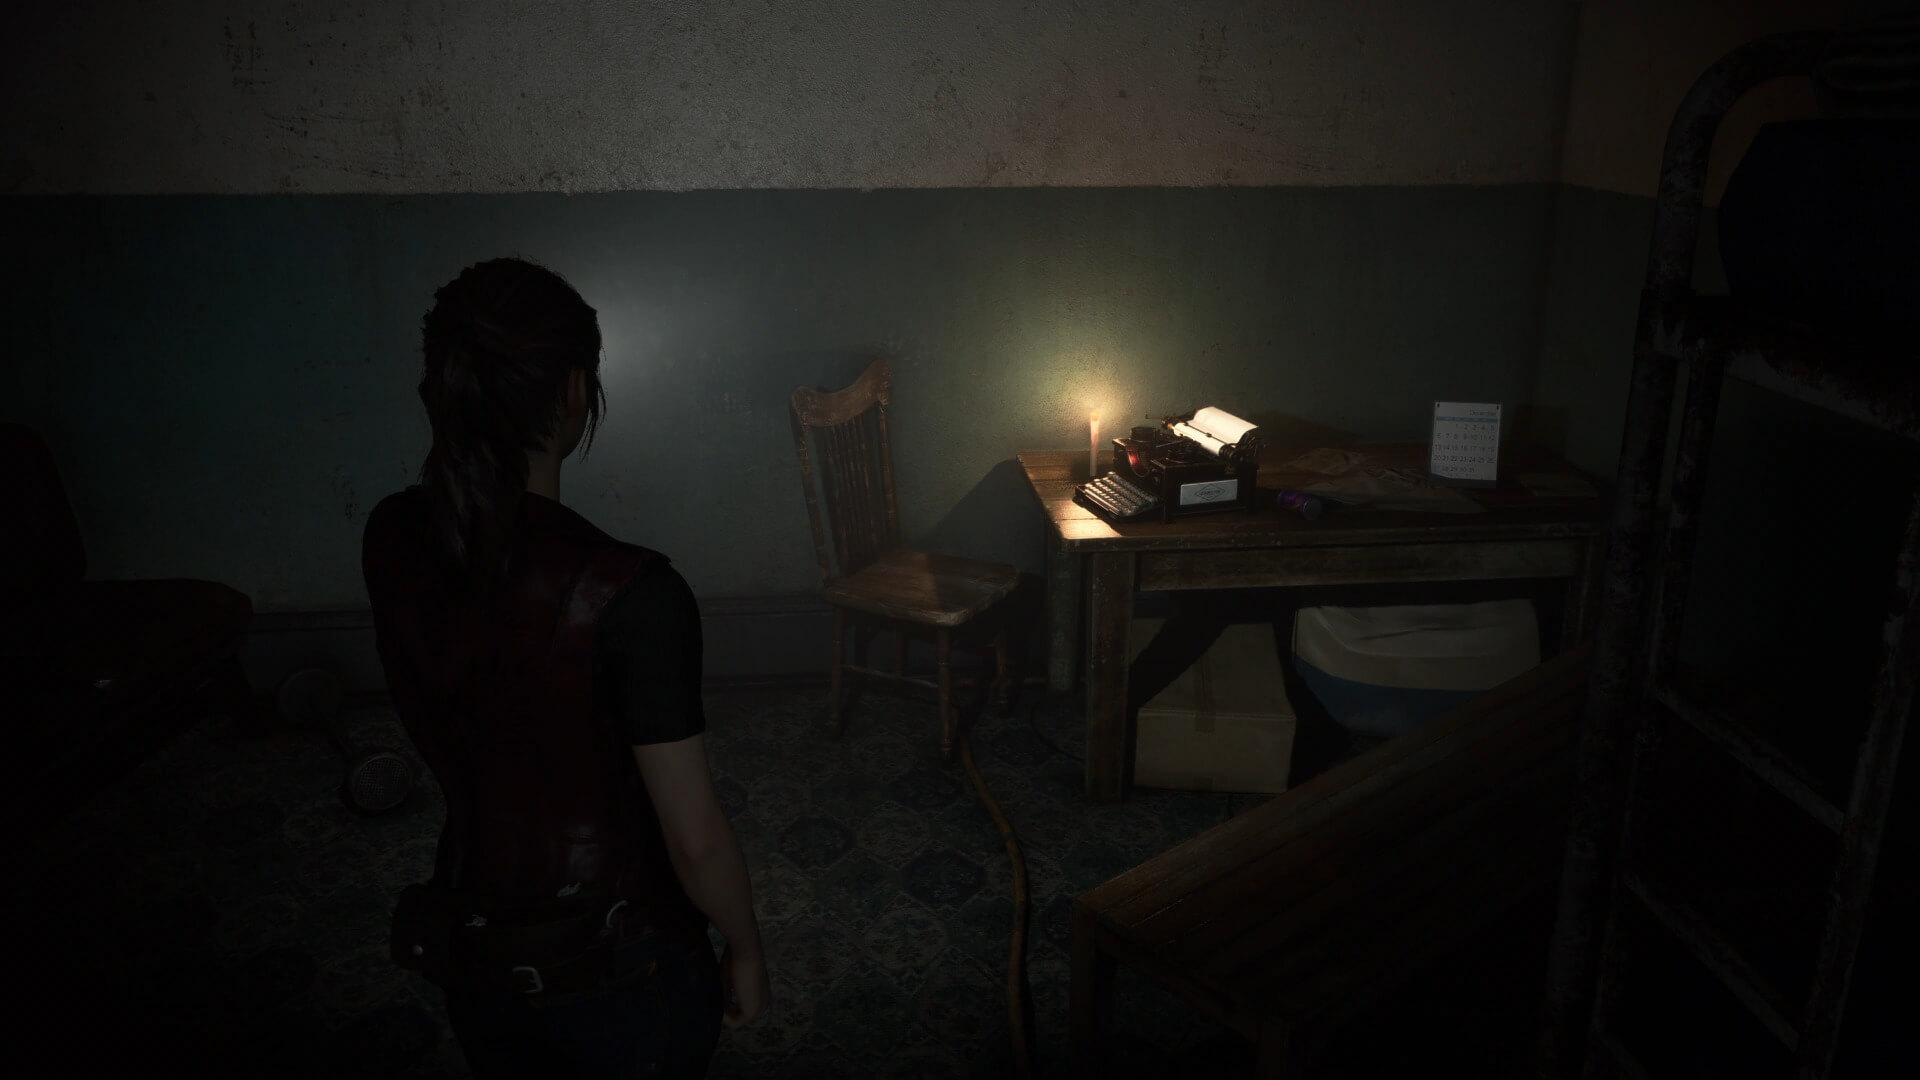 Resident Evil Code: Veronica X HD Review - A Fresh Look For An Old